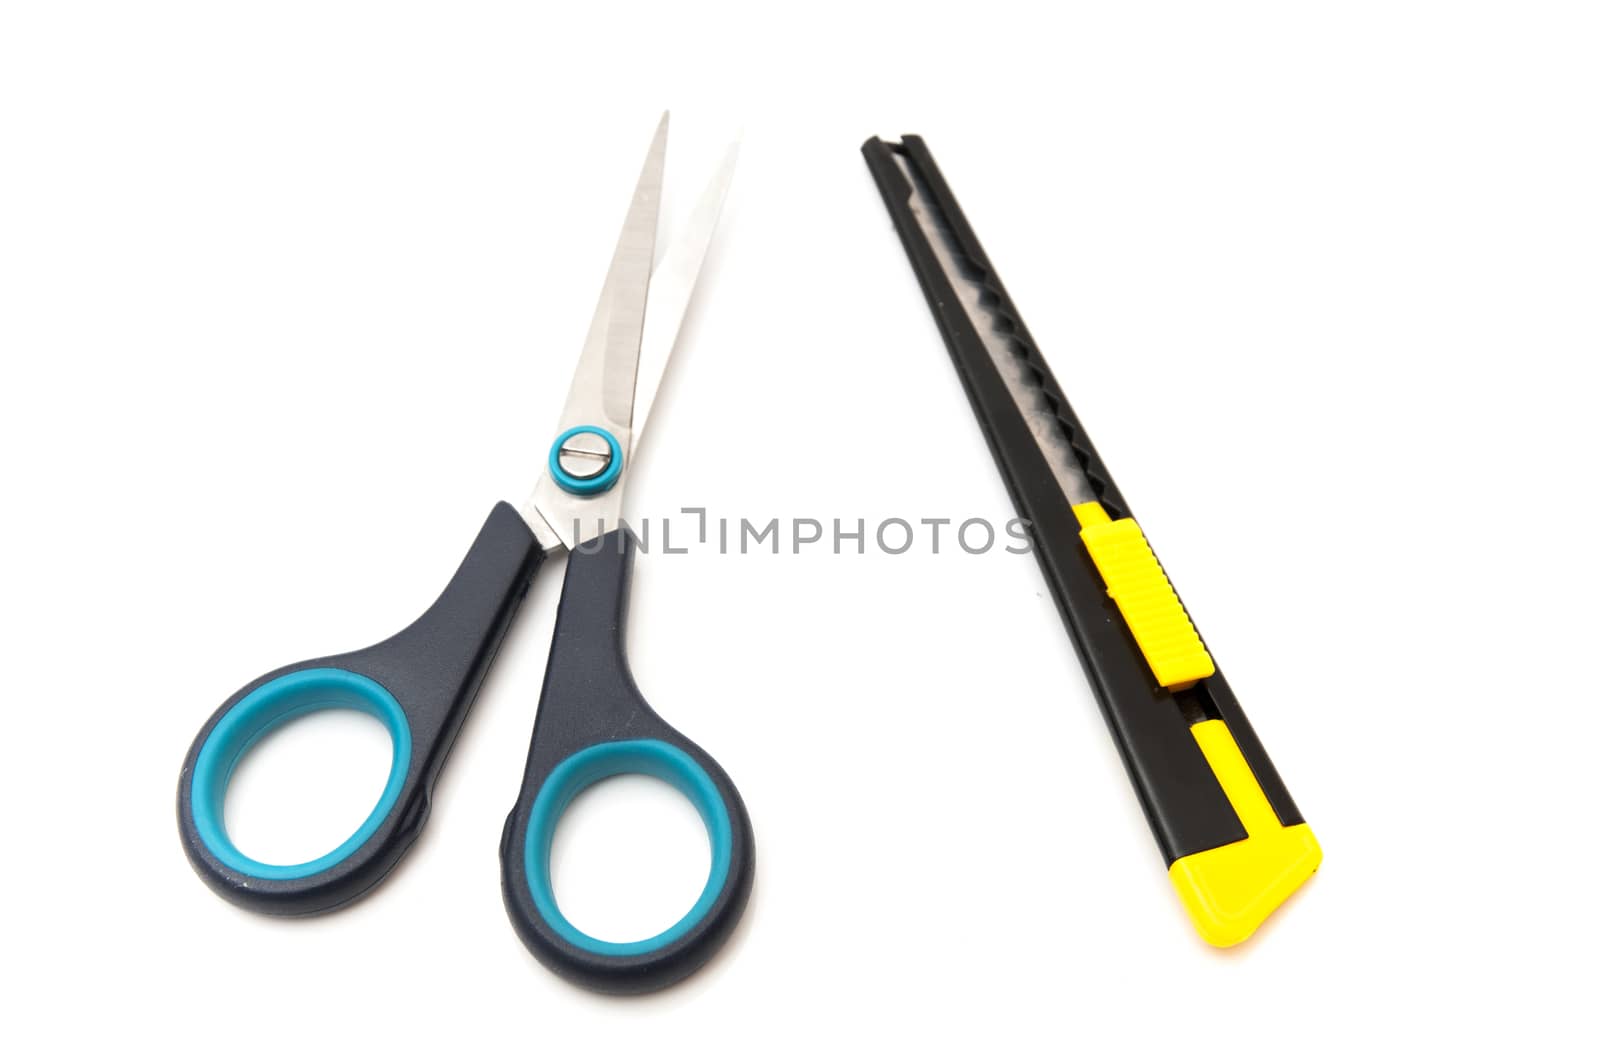 cuter scissors on a white background